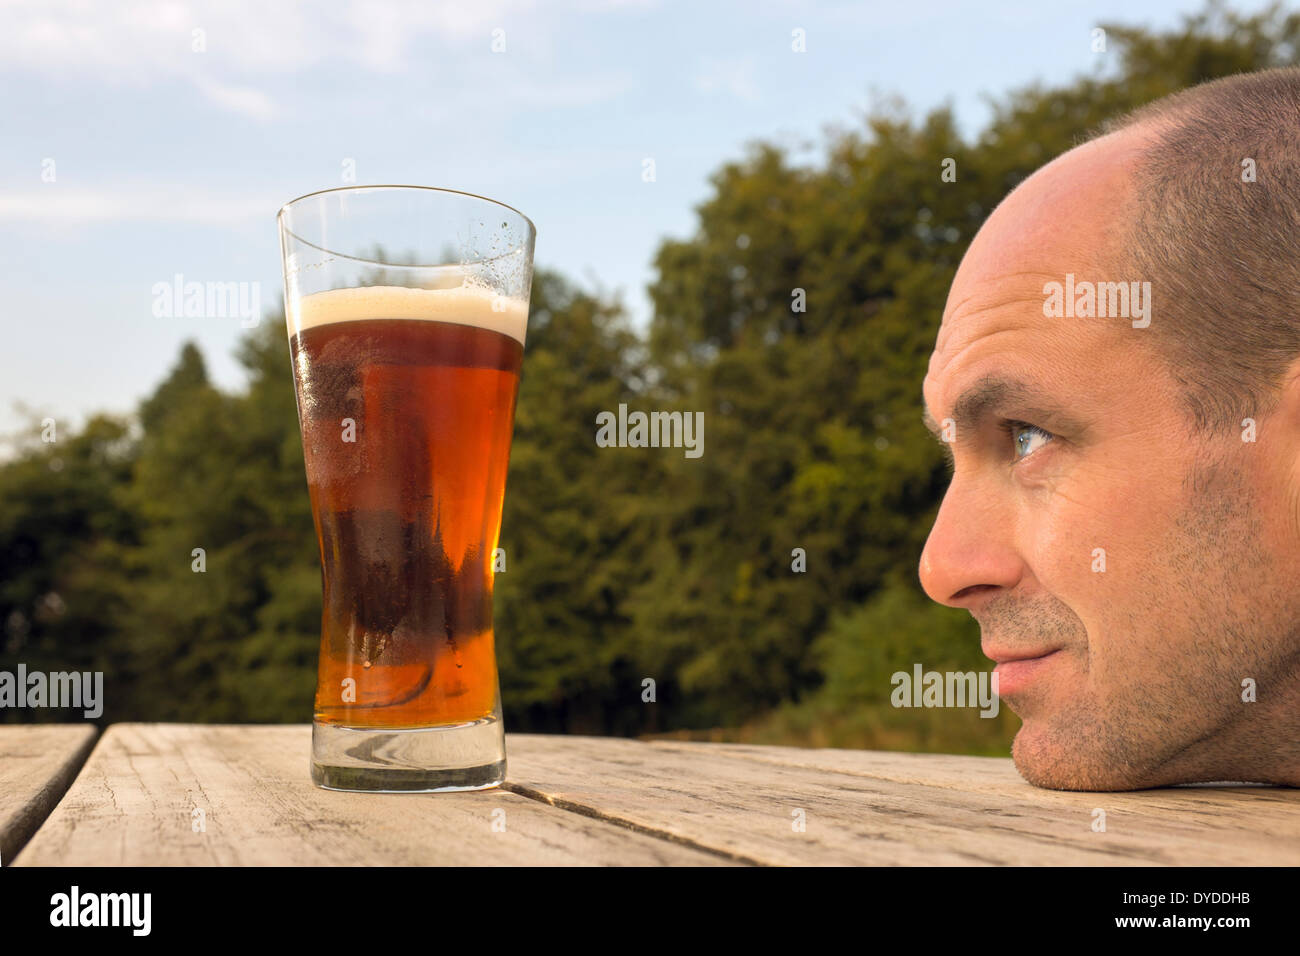 A man looking longingly at a glass of beer. Stock Photo